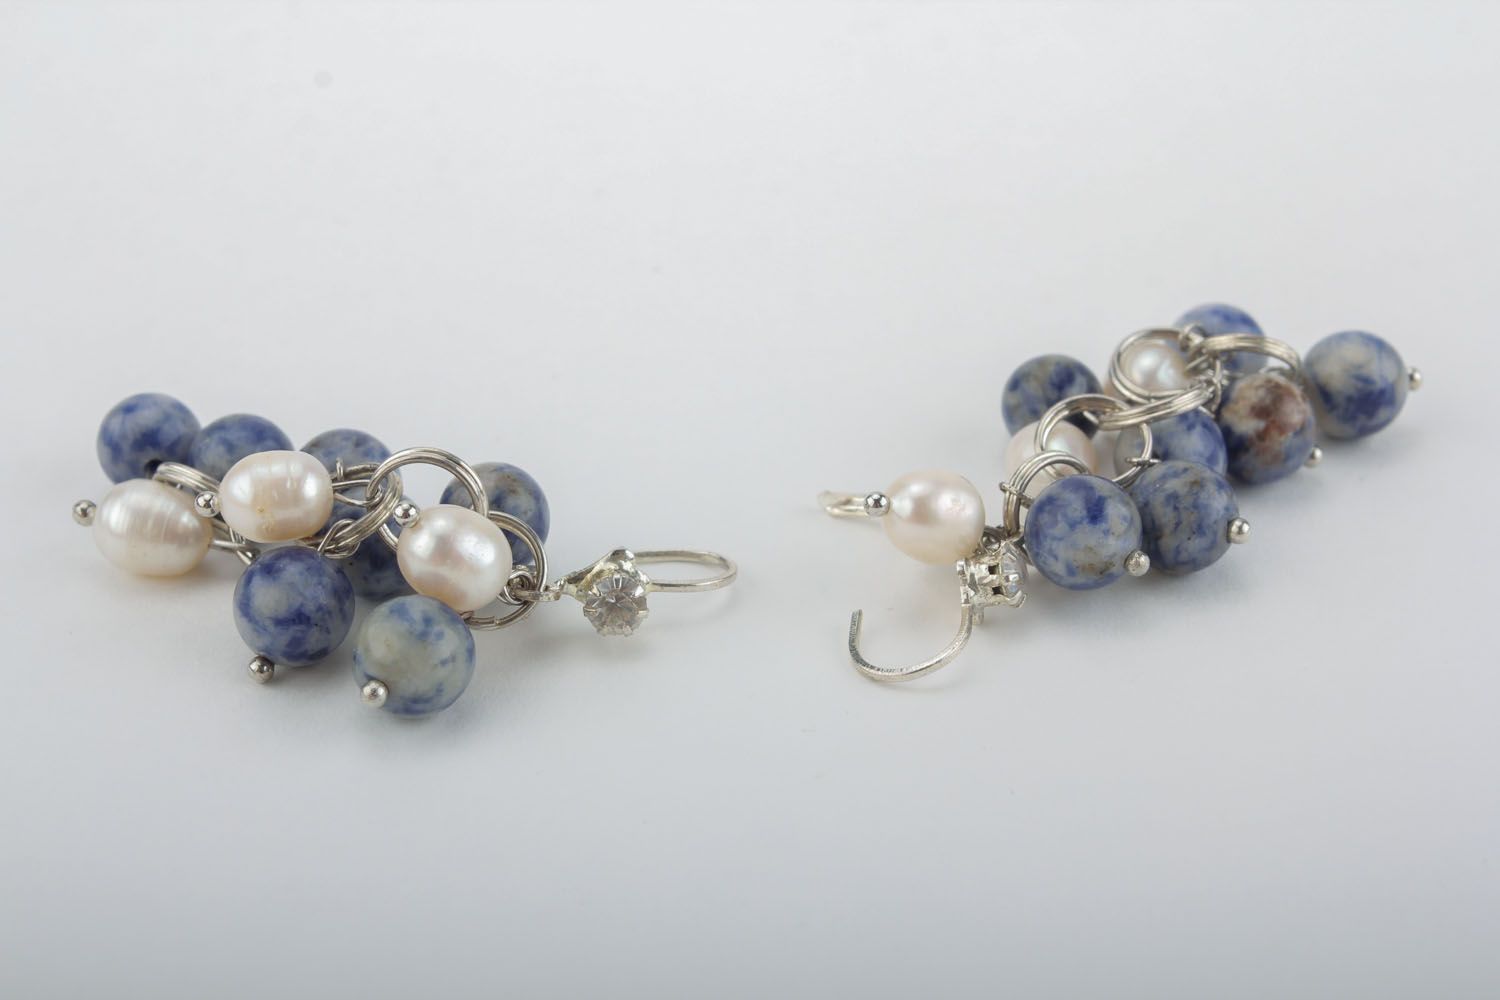 Earrings with natural stone charms photo 3